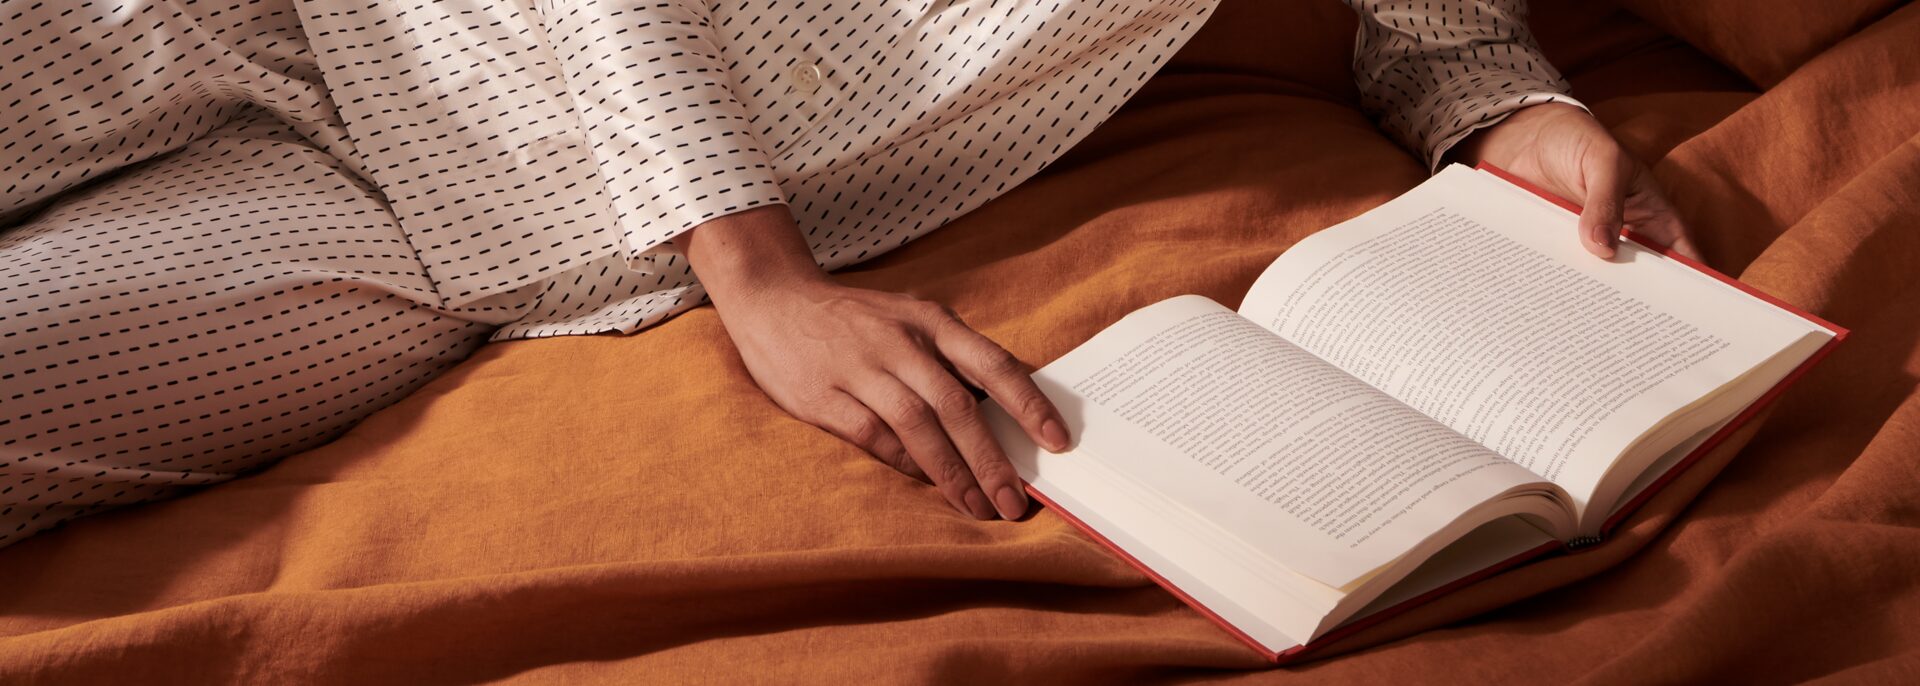 A woman in bed reading a book.